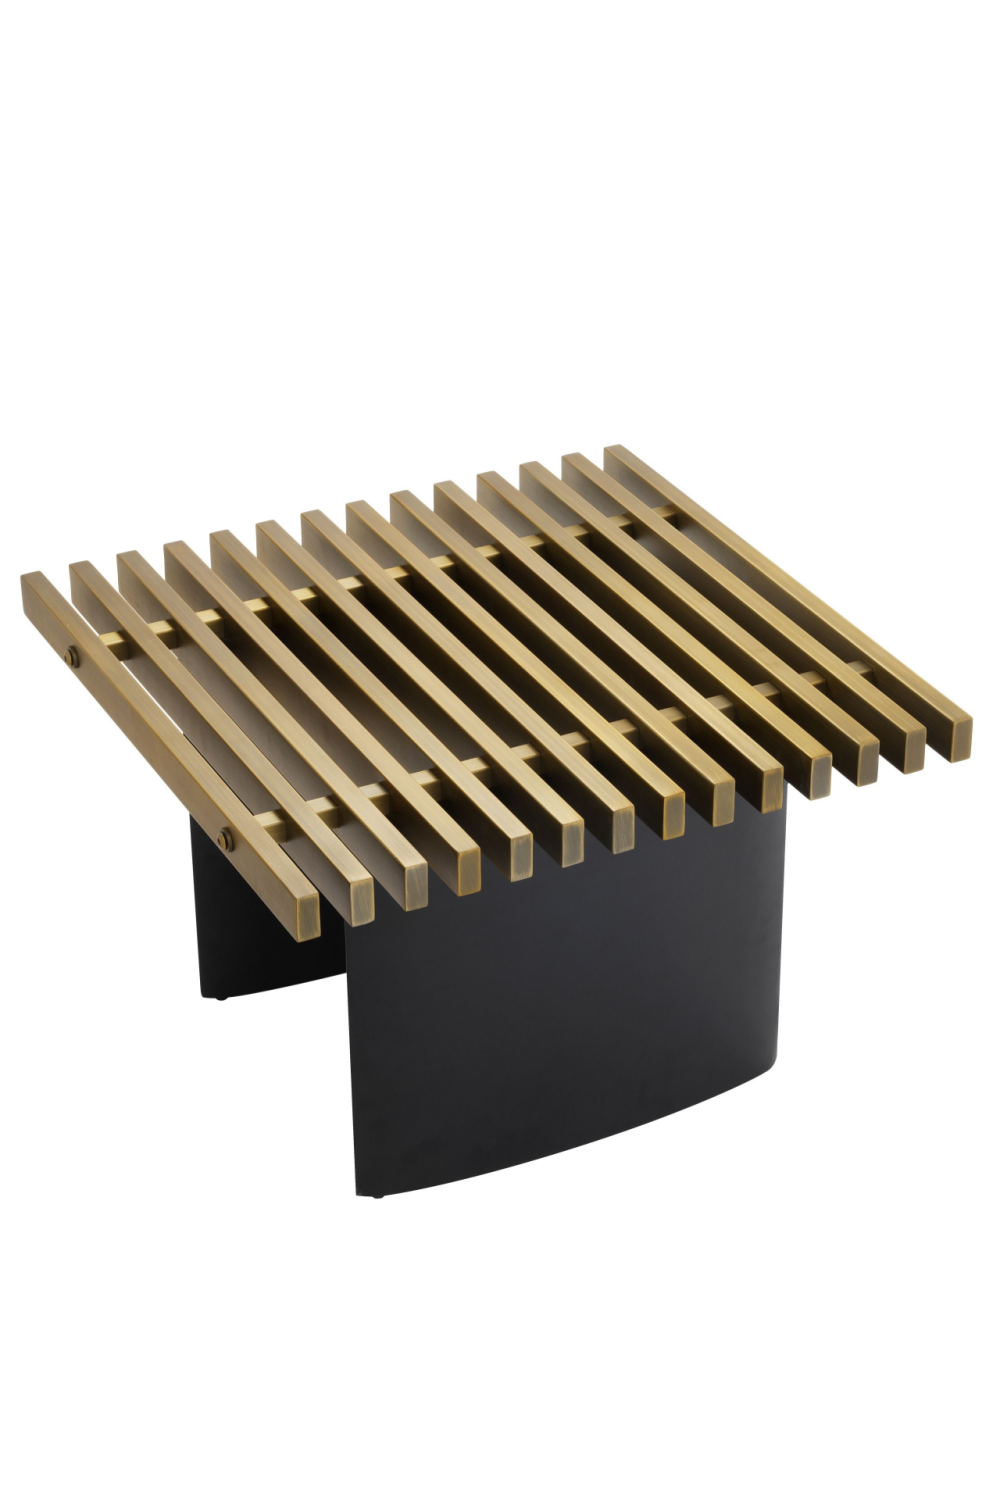 Brushed Brass Square Side Table | Eichholtz Vauclair | Oroa.com